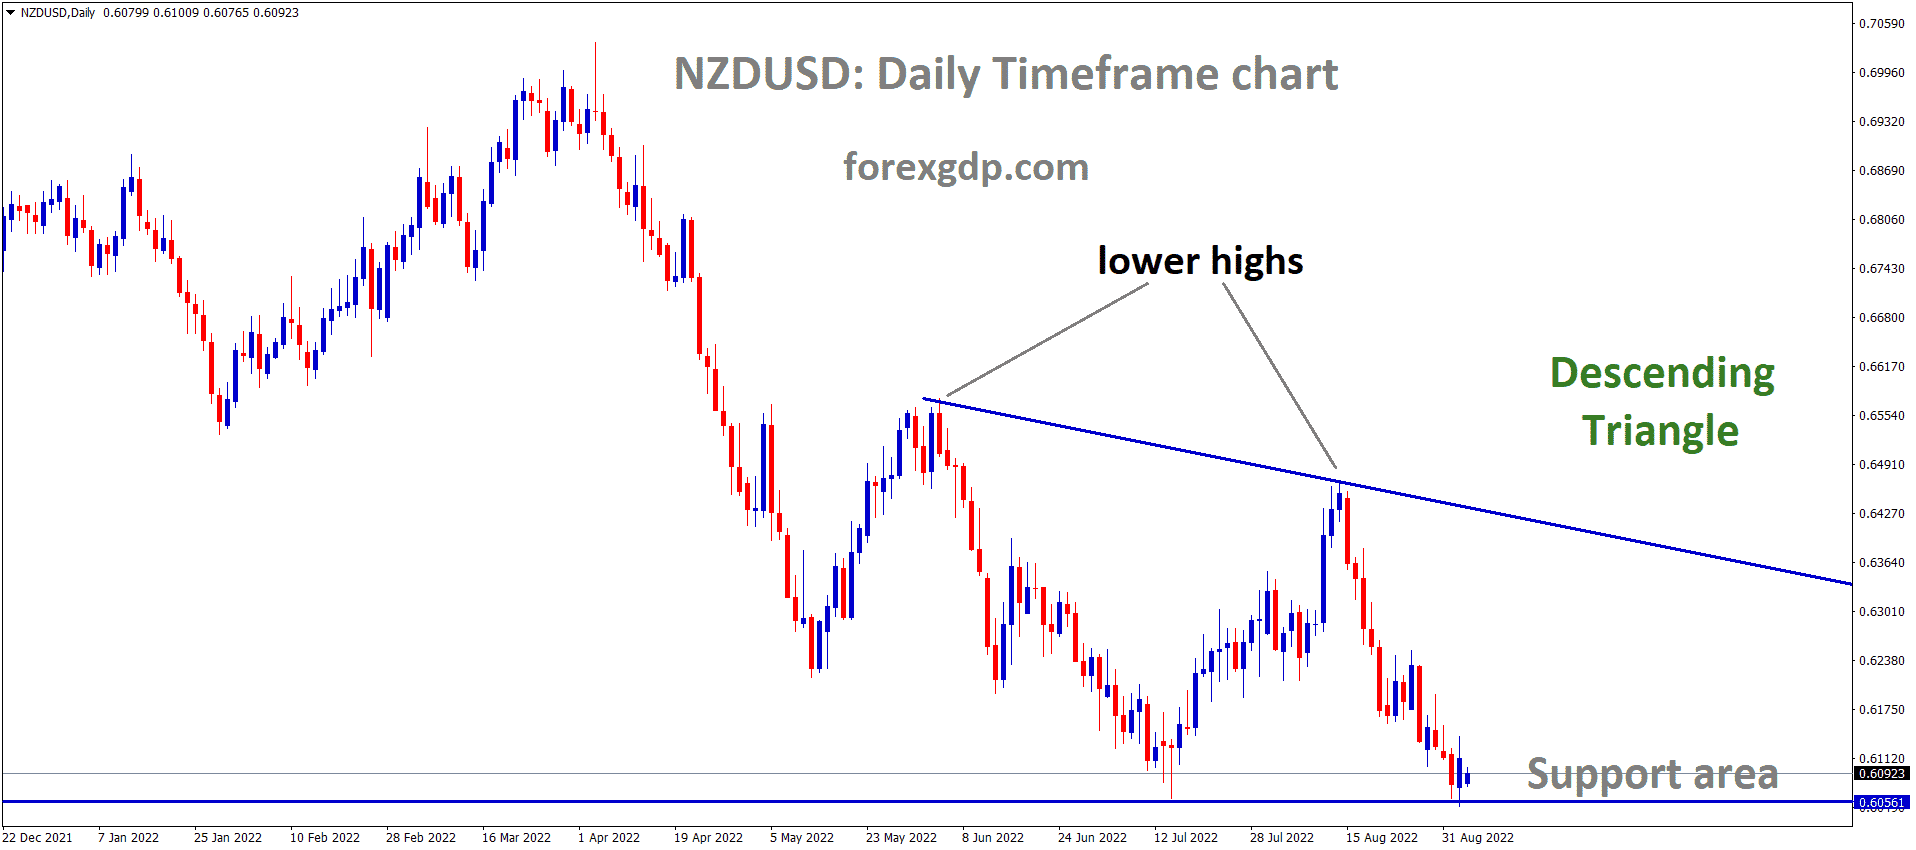 NZDUSD is moving in the Descending triangle pattern and the market has rebounded from the horizontal support area of the pattern 1